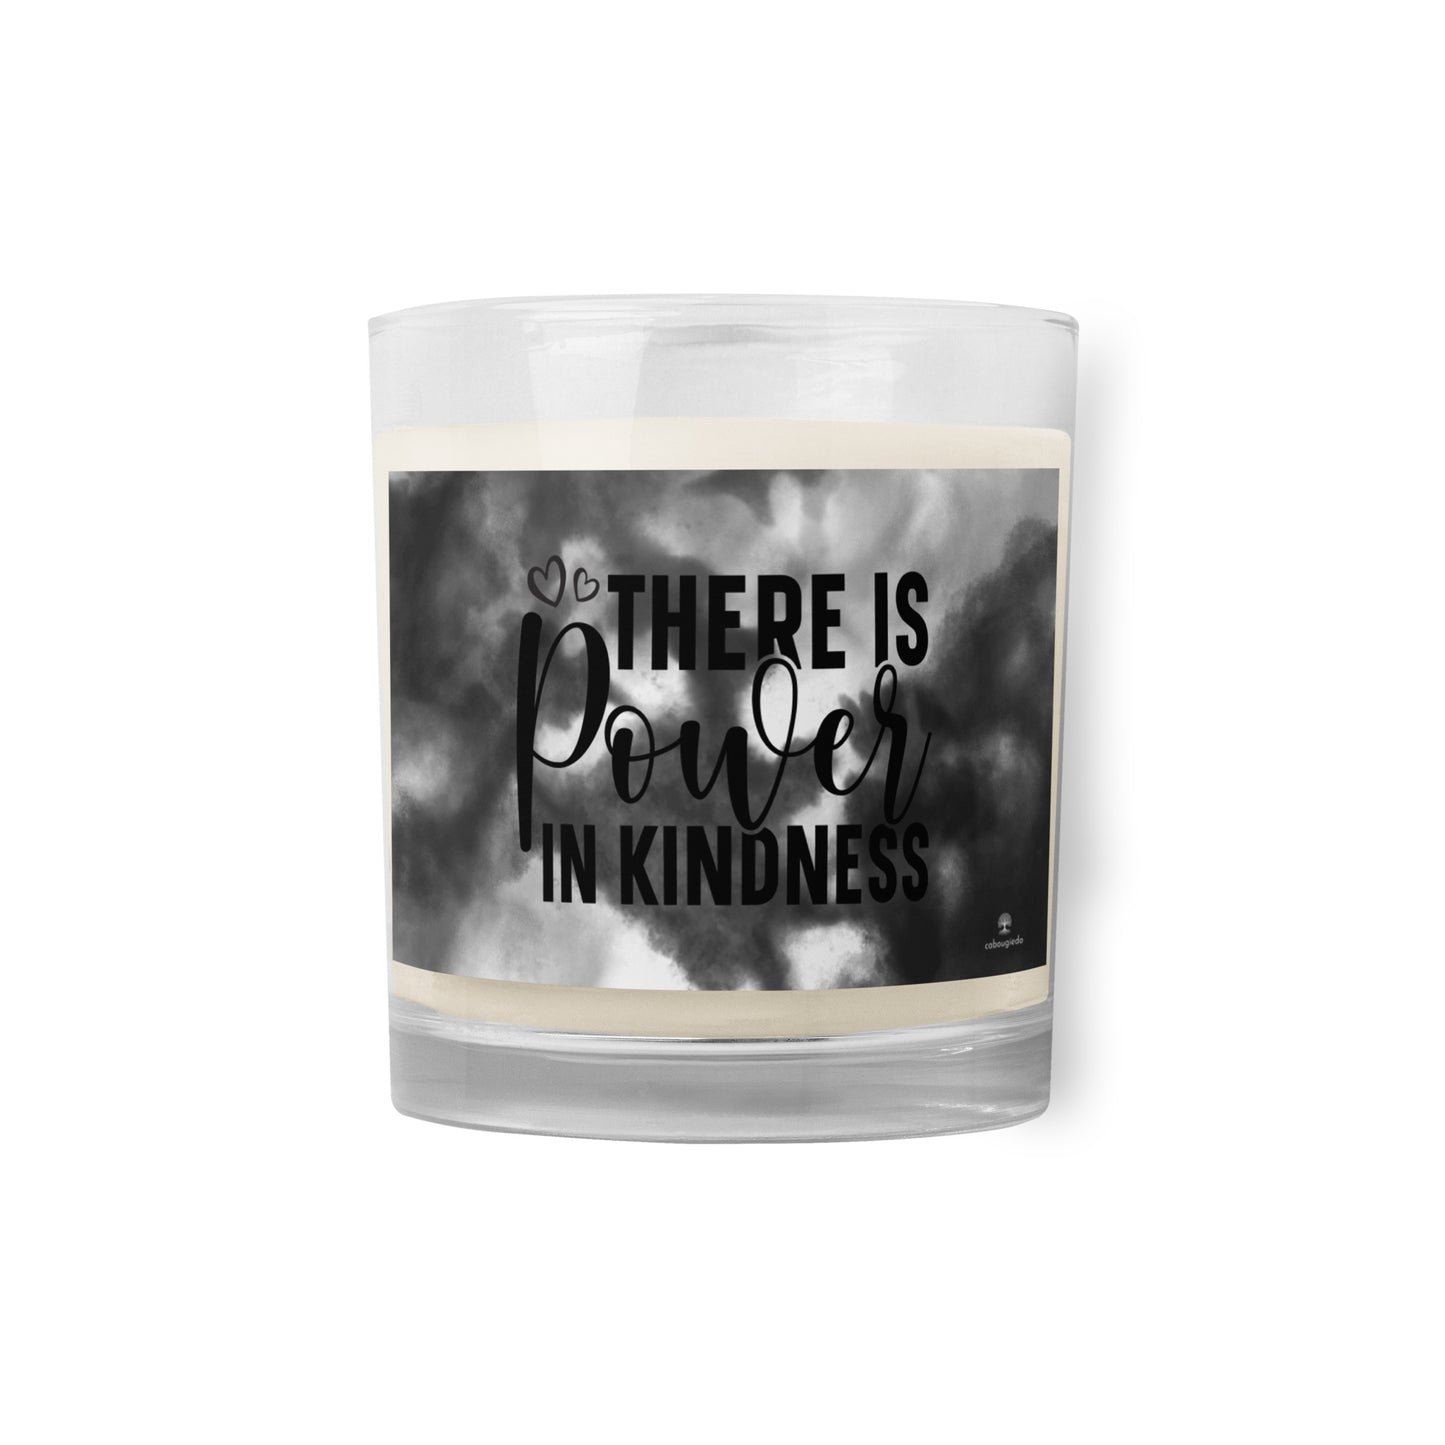 Glass jar soy wax candle - There is Power in Kindness